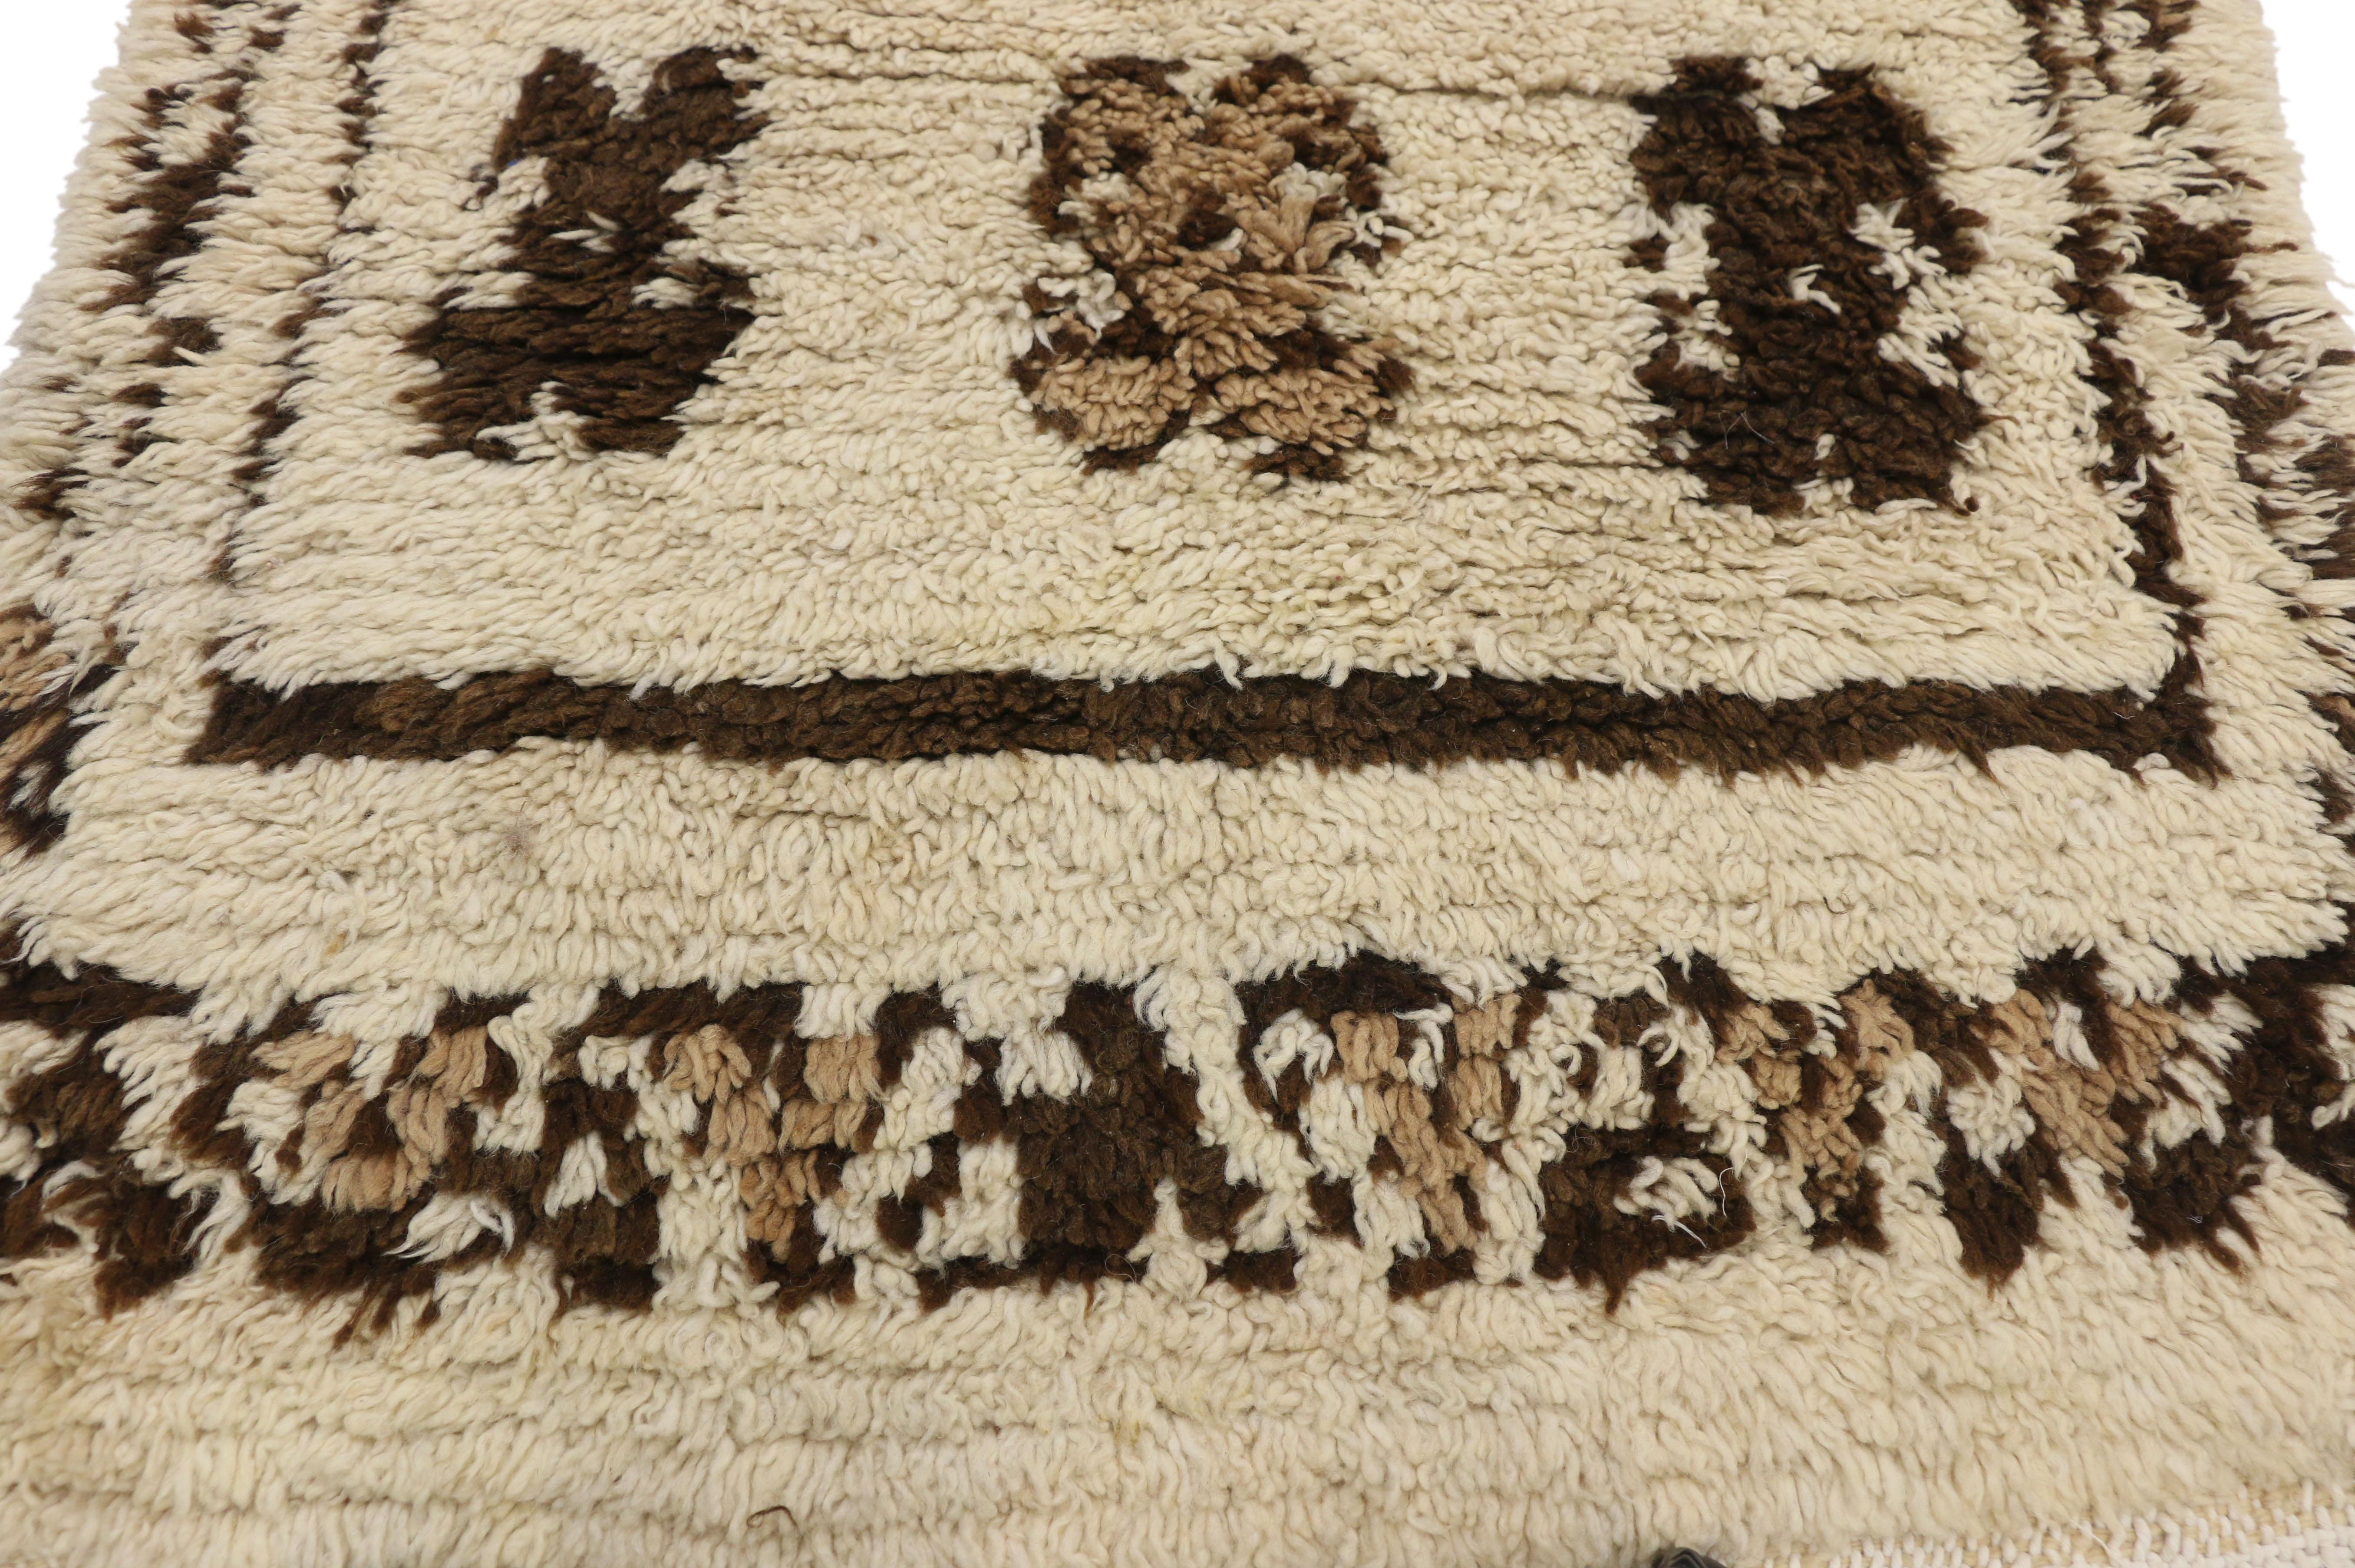 Vintage Berber Moroccan Rug with Tribal Style In Good Condition For Sale In Dallas, TX